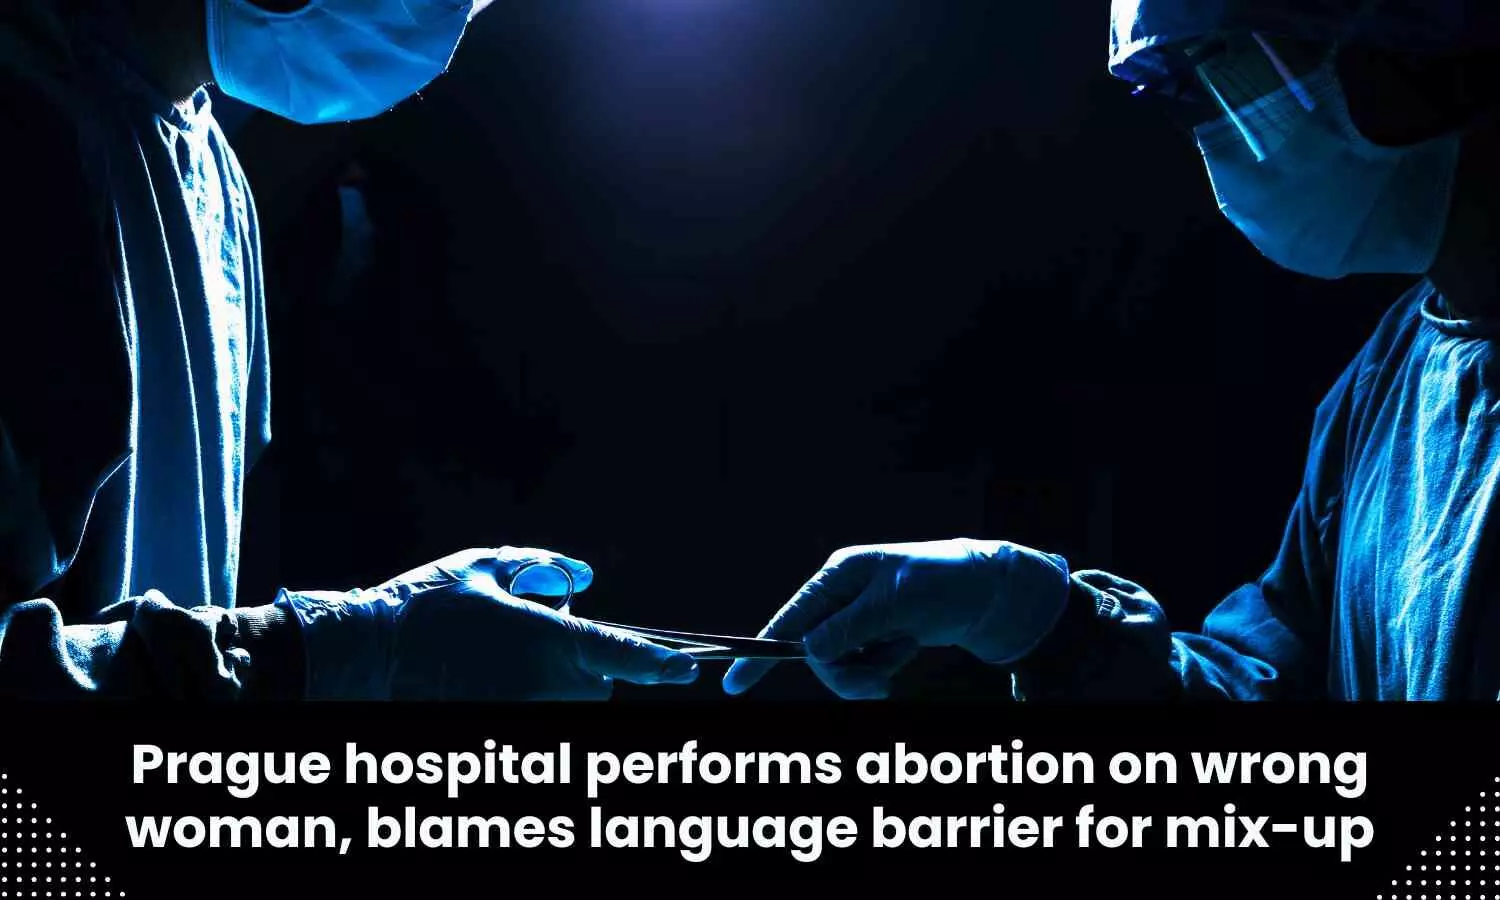 Abortion performed on wrong woman at Prague Hospital due to language barrier